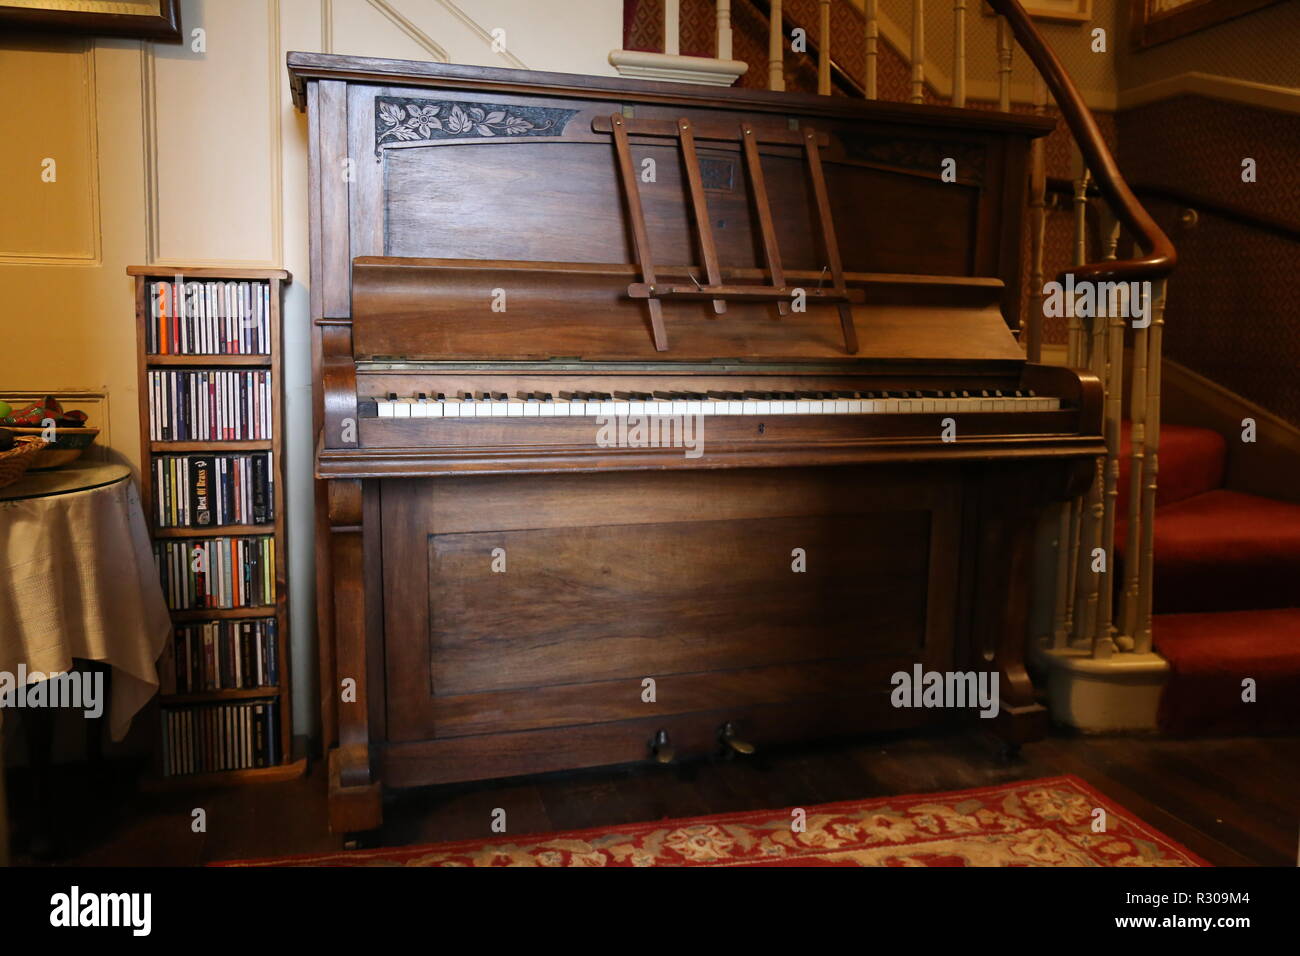 Old upright piano in hallway Stock Photo